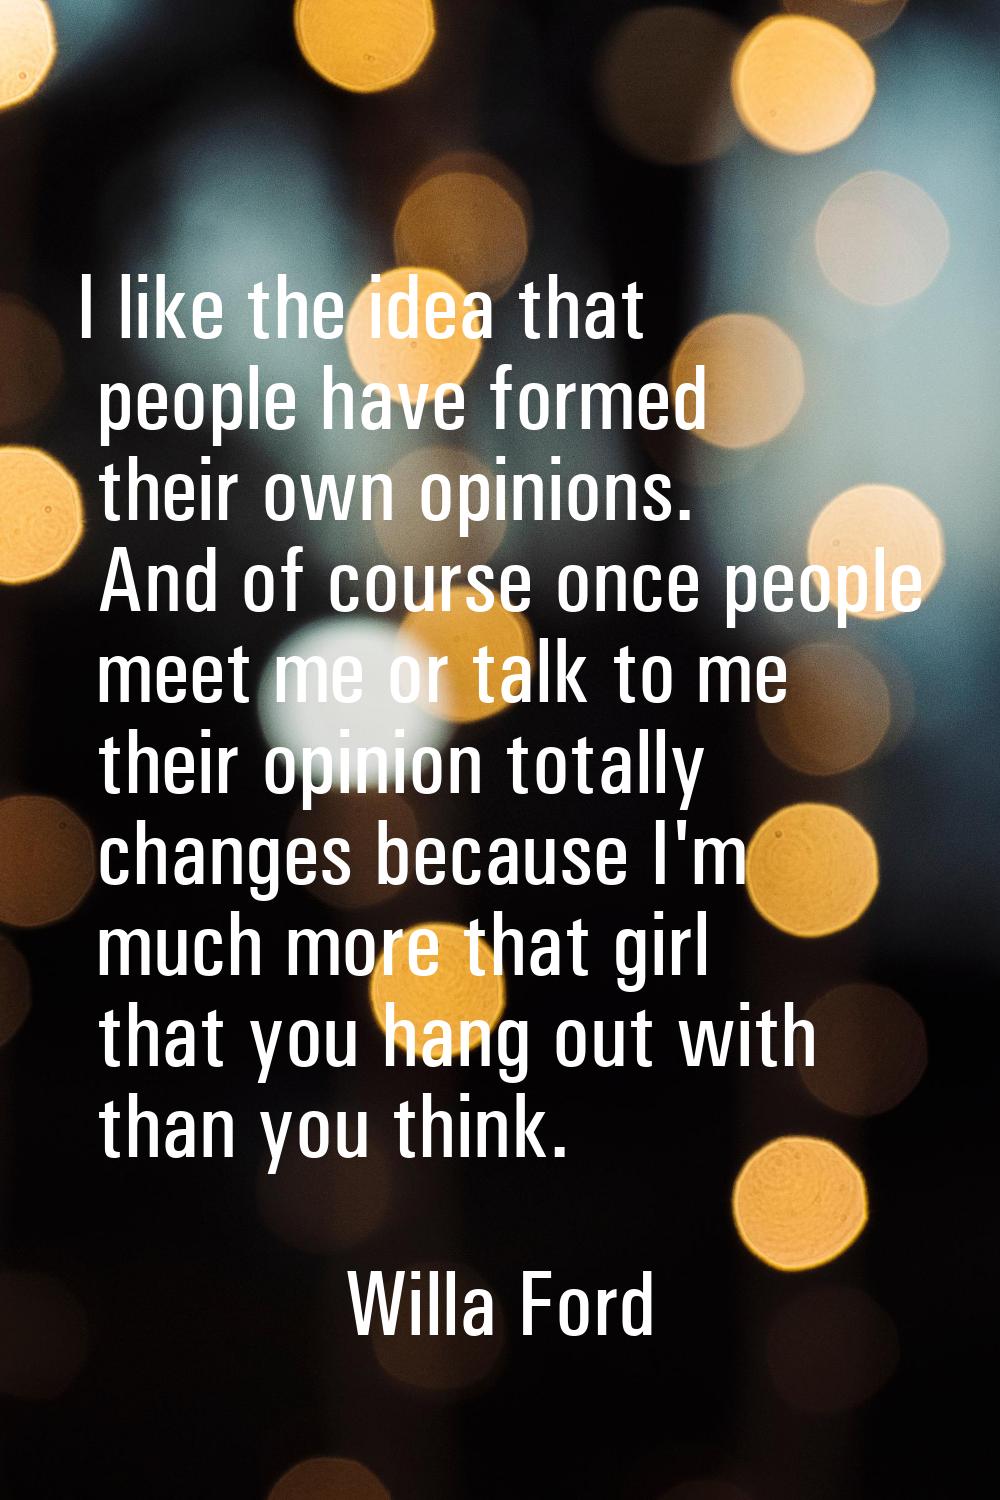 I like the idea that people have formed their own opinions. And of course once people meet me or ta